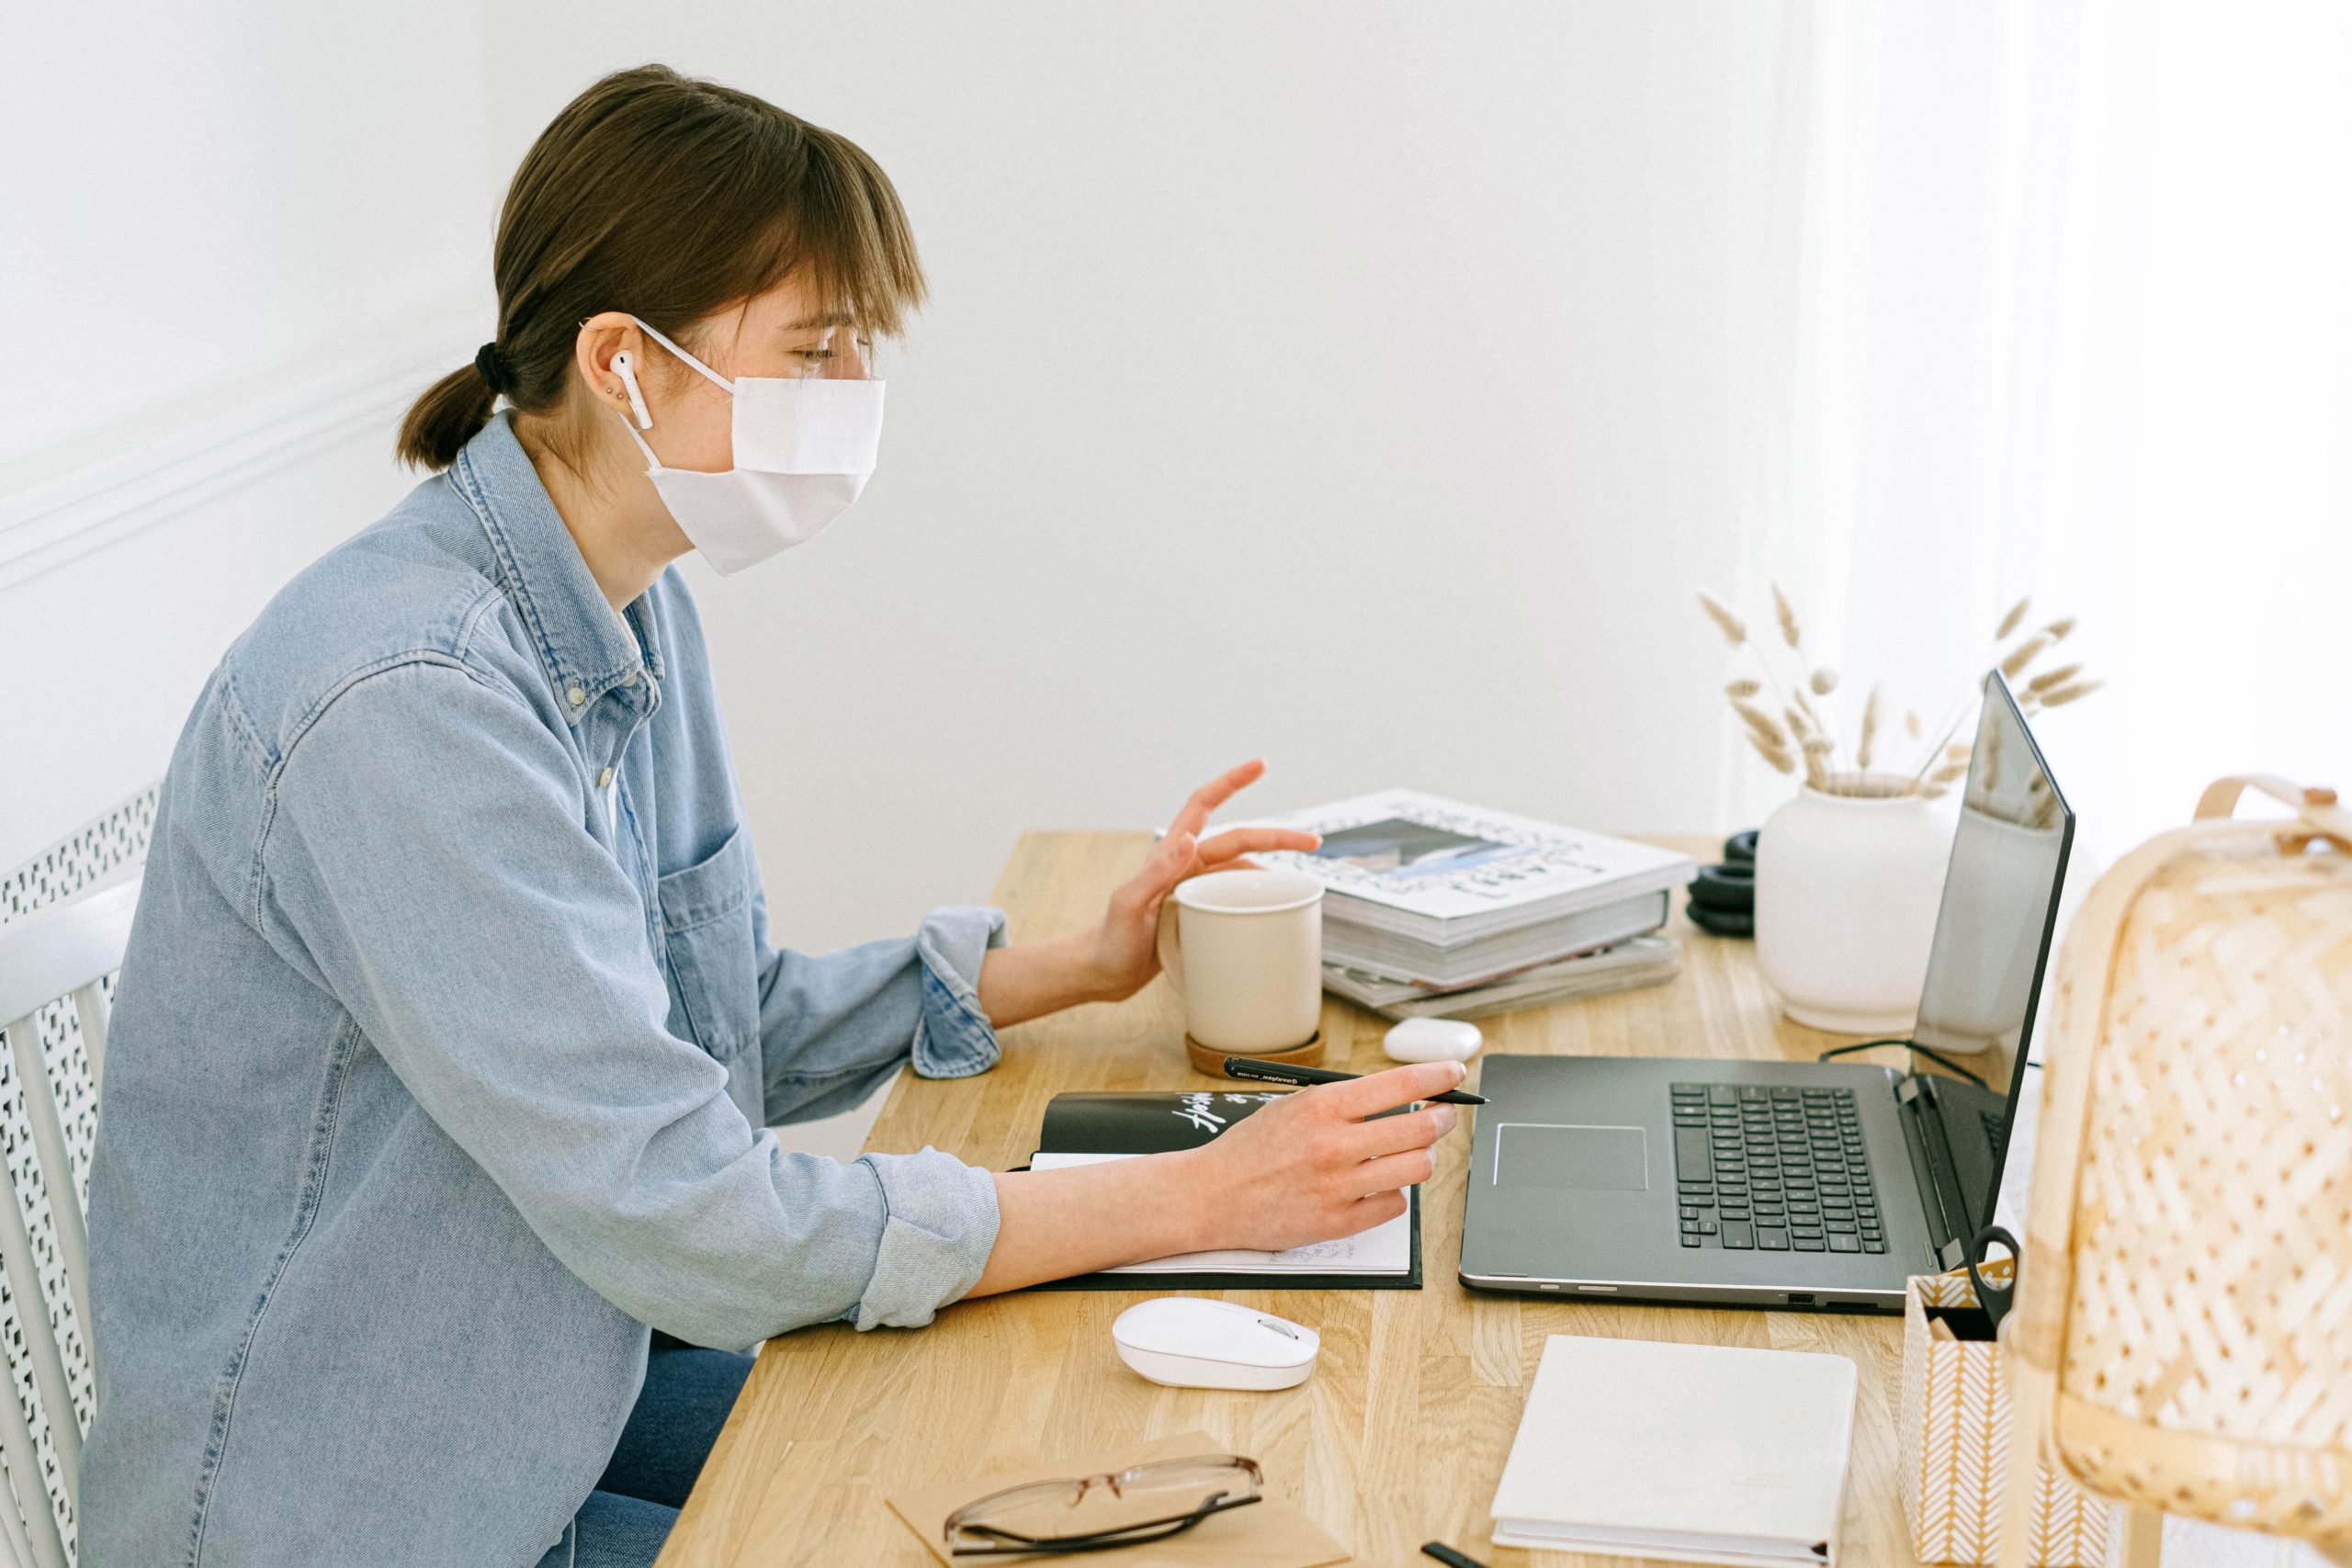 woman-with-face-mask-looking-at-a-laptop-4240606